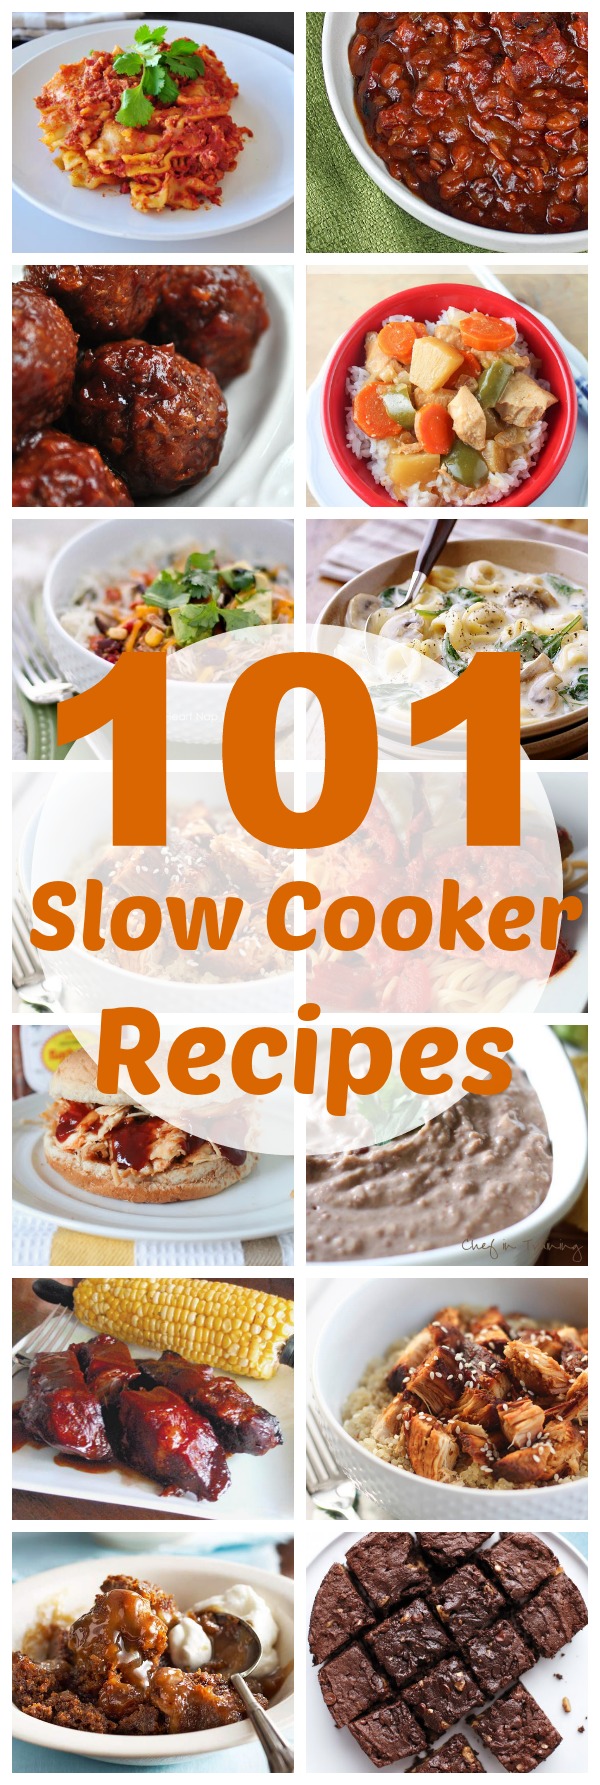 101 Slow Cooker Recipes - this is awesome!  It's even broken down into Chicken, Beef, Pork, Desserts, etc! | www.classyclutter.net